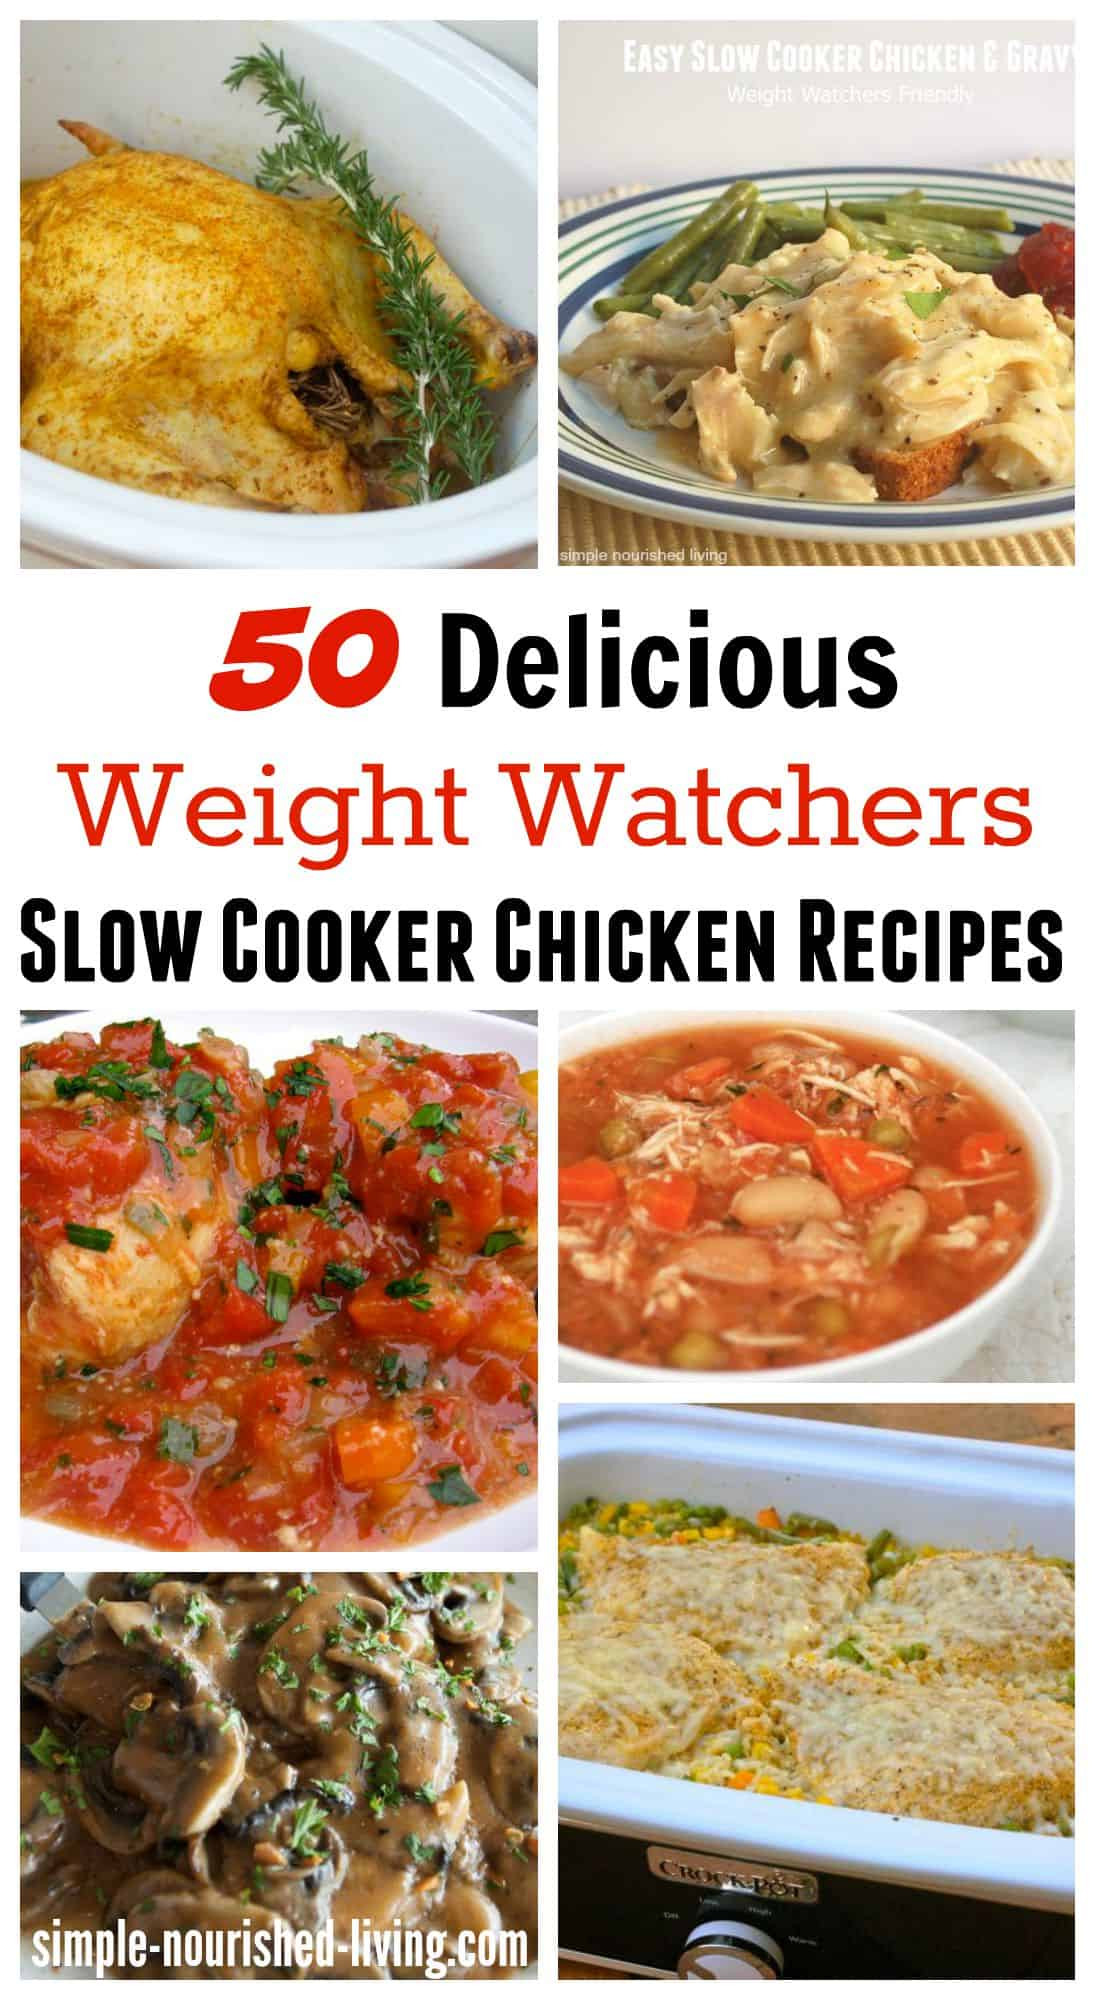 Easy Chicken Slow Cooker Recipes Healthy
 Healthy Slow Cooker Chicken Recipes for Weight Watchers